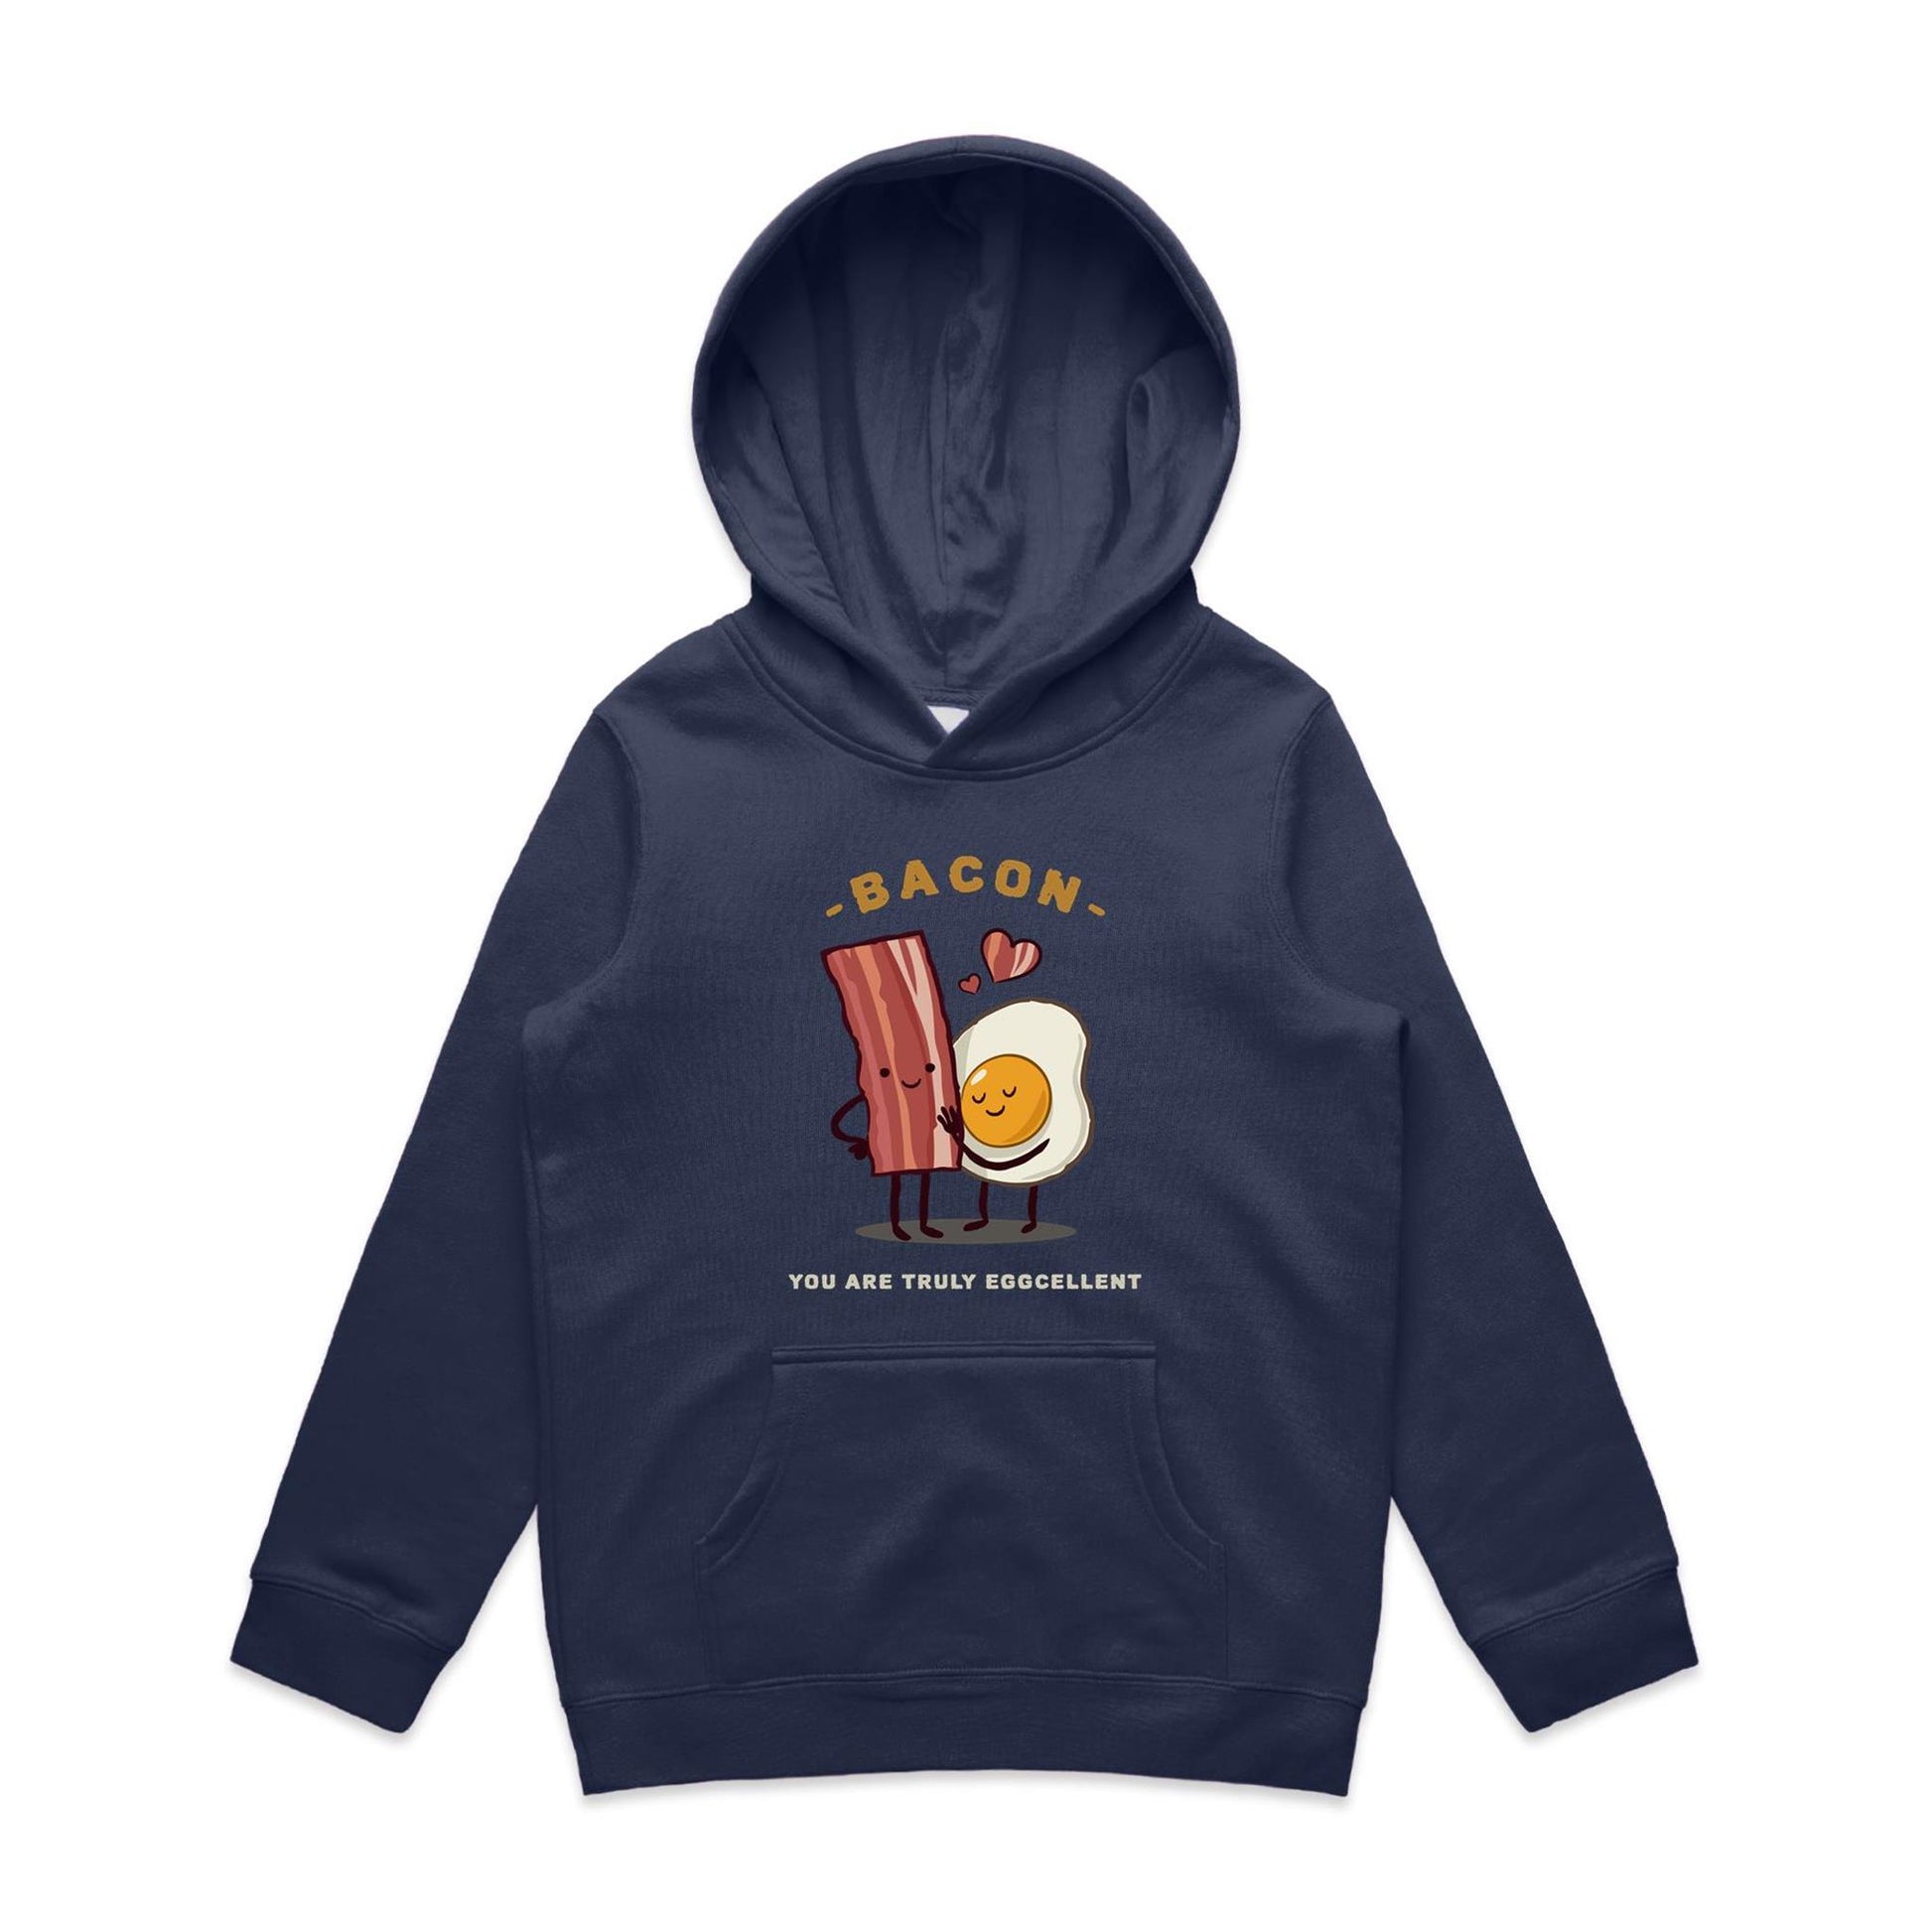 Bacon, You Are Truly Eggcellent - Youth Supply Hood Midnight Blue Kids Hoodie Food